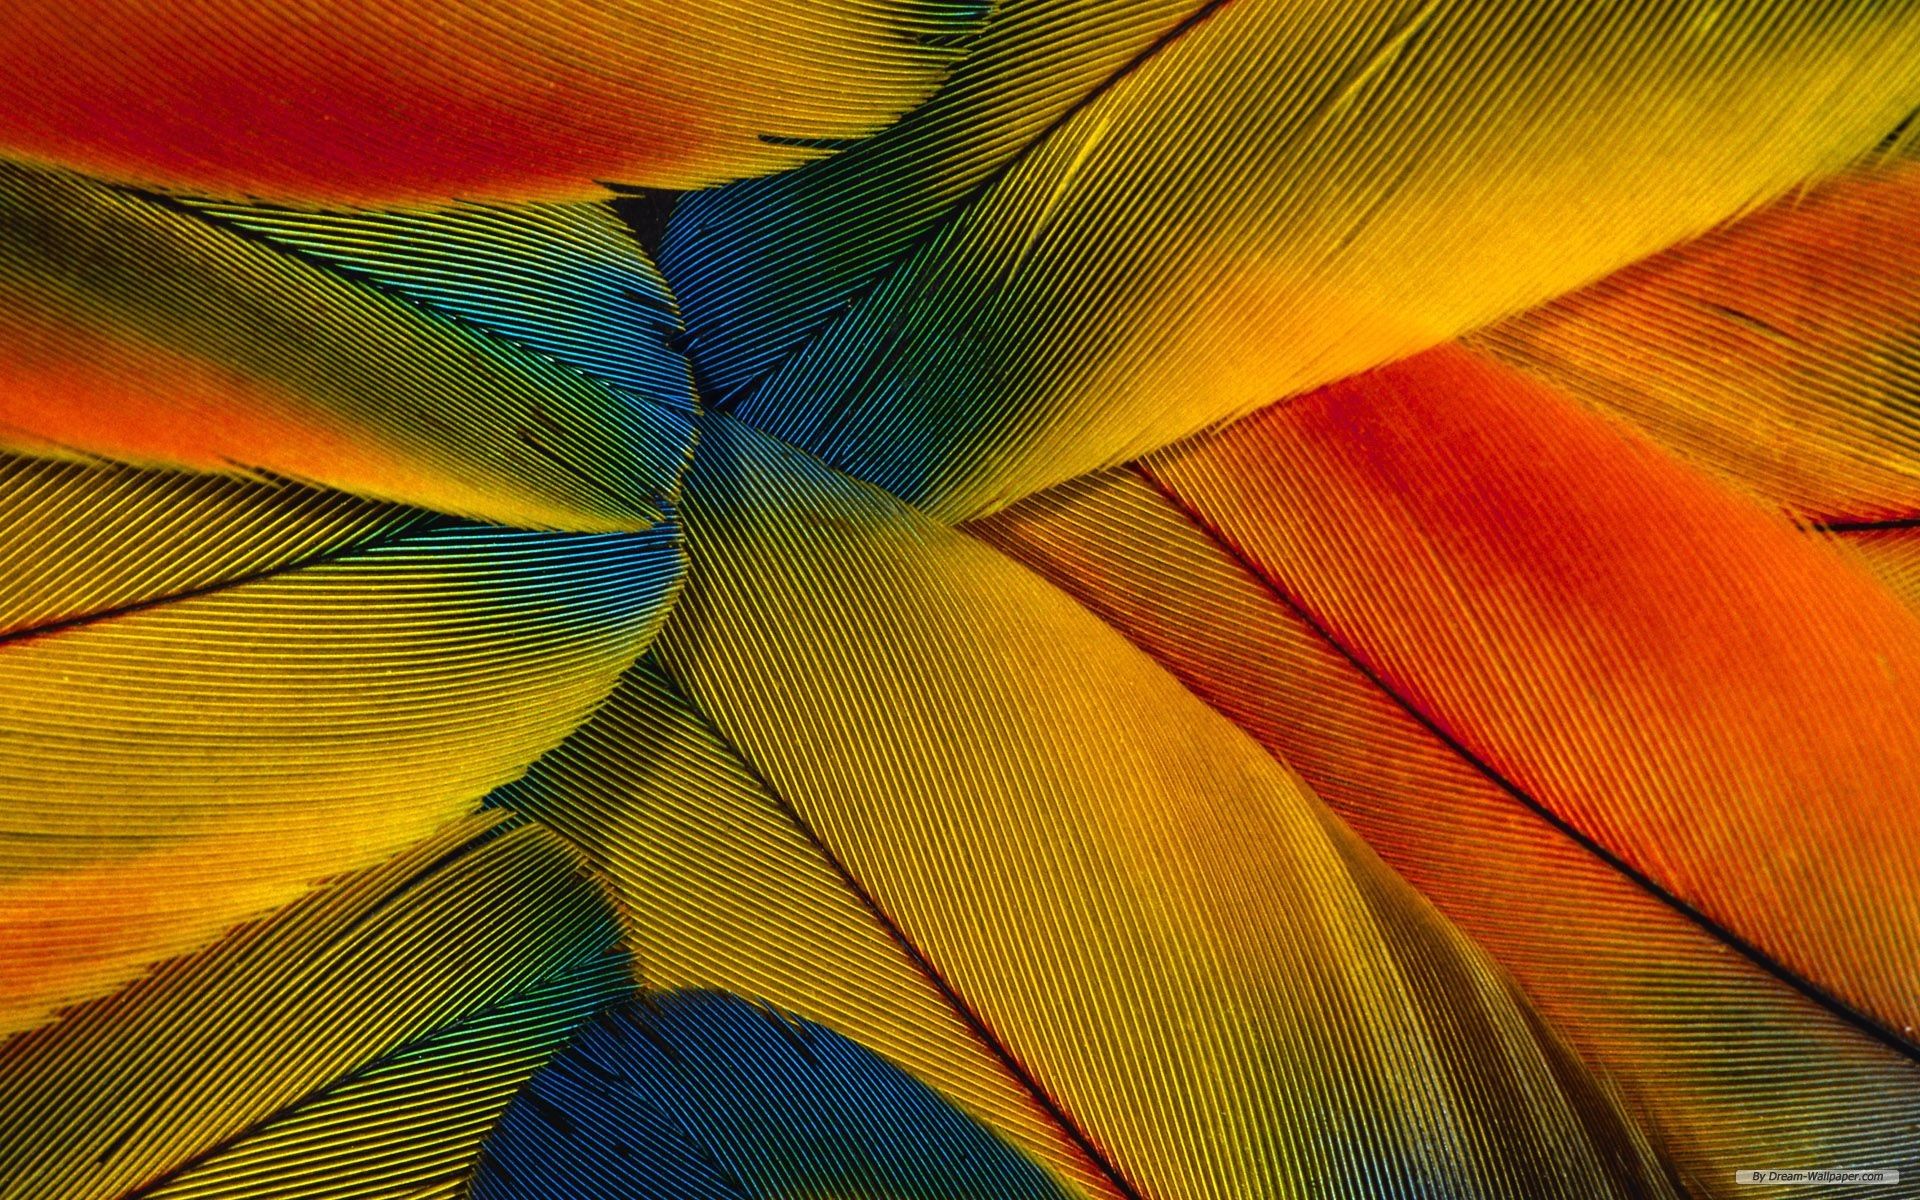 Bing image: Bright and colorful peacock feathers - Bing Wallpaper Gallery